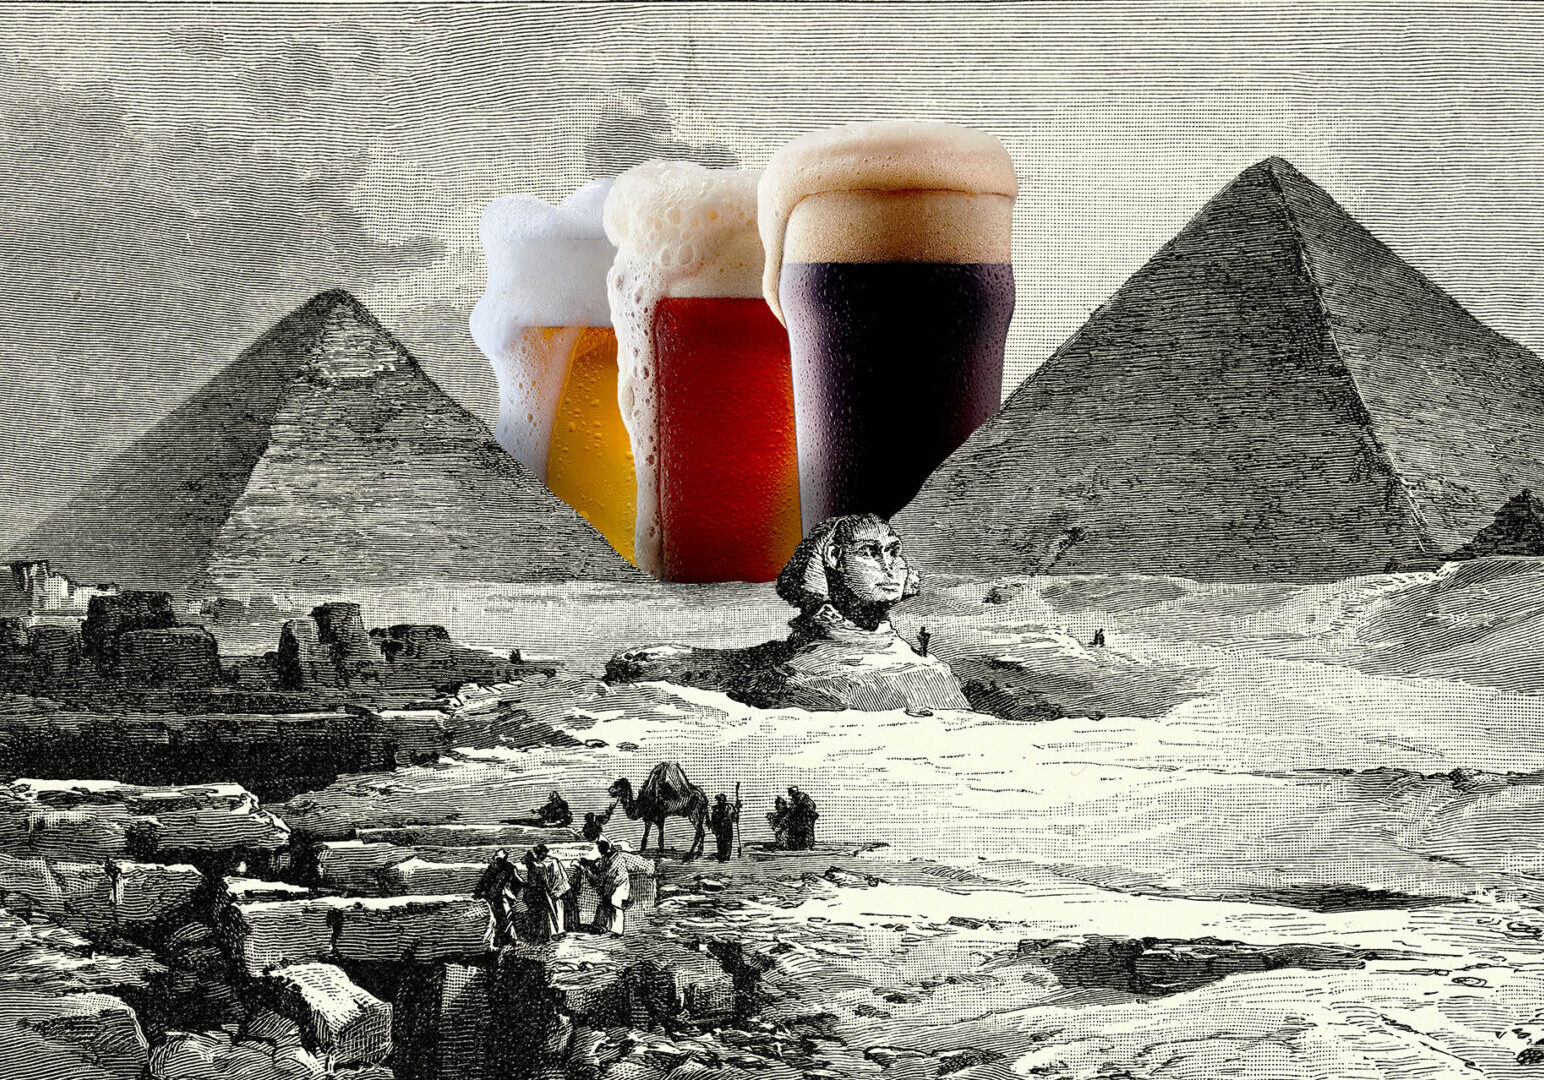 The World oldest known beer factory discovered in Egypt-Beer in Ancient Egypt